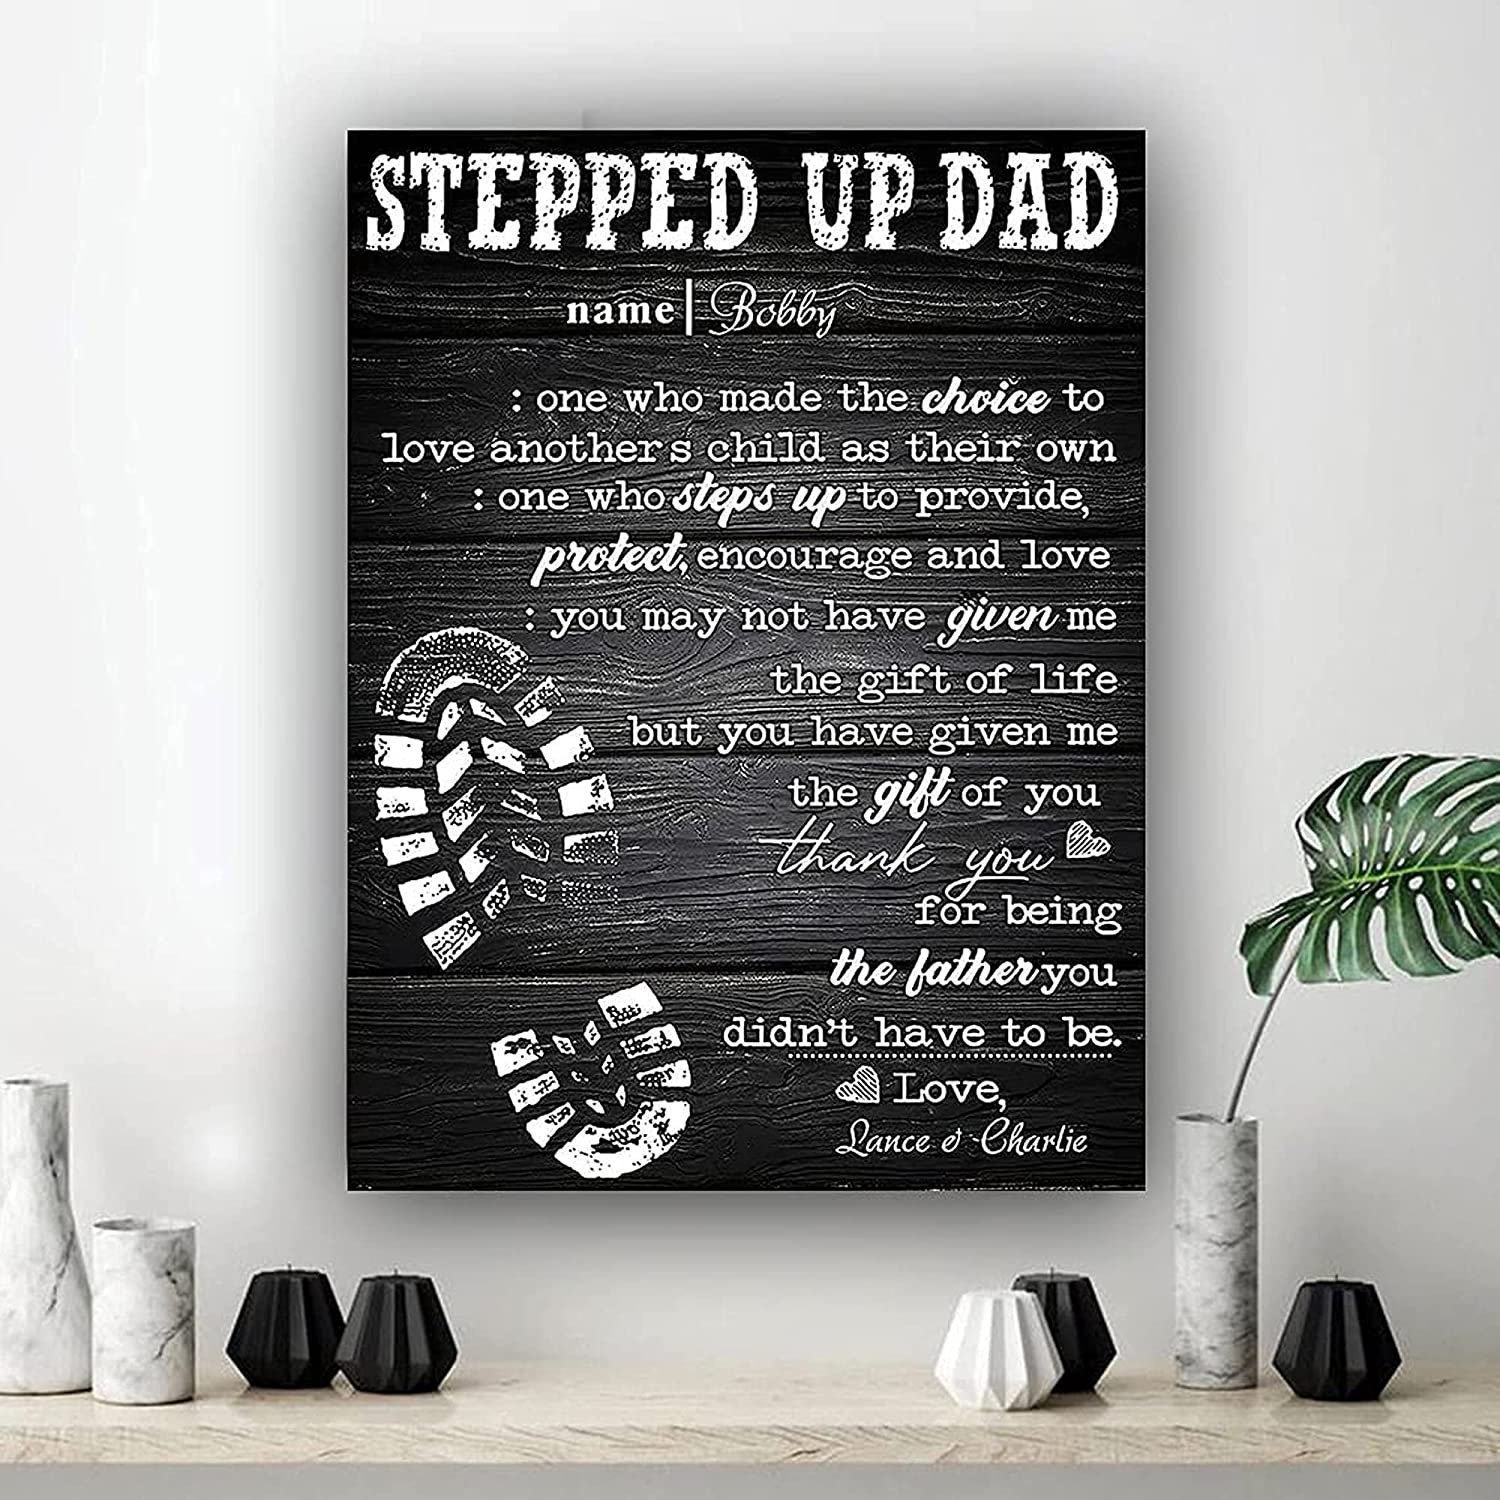 Personalized Stepped Up Dad Canvas Happy Father's Day Meaningful Family Quote